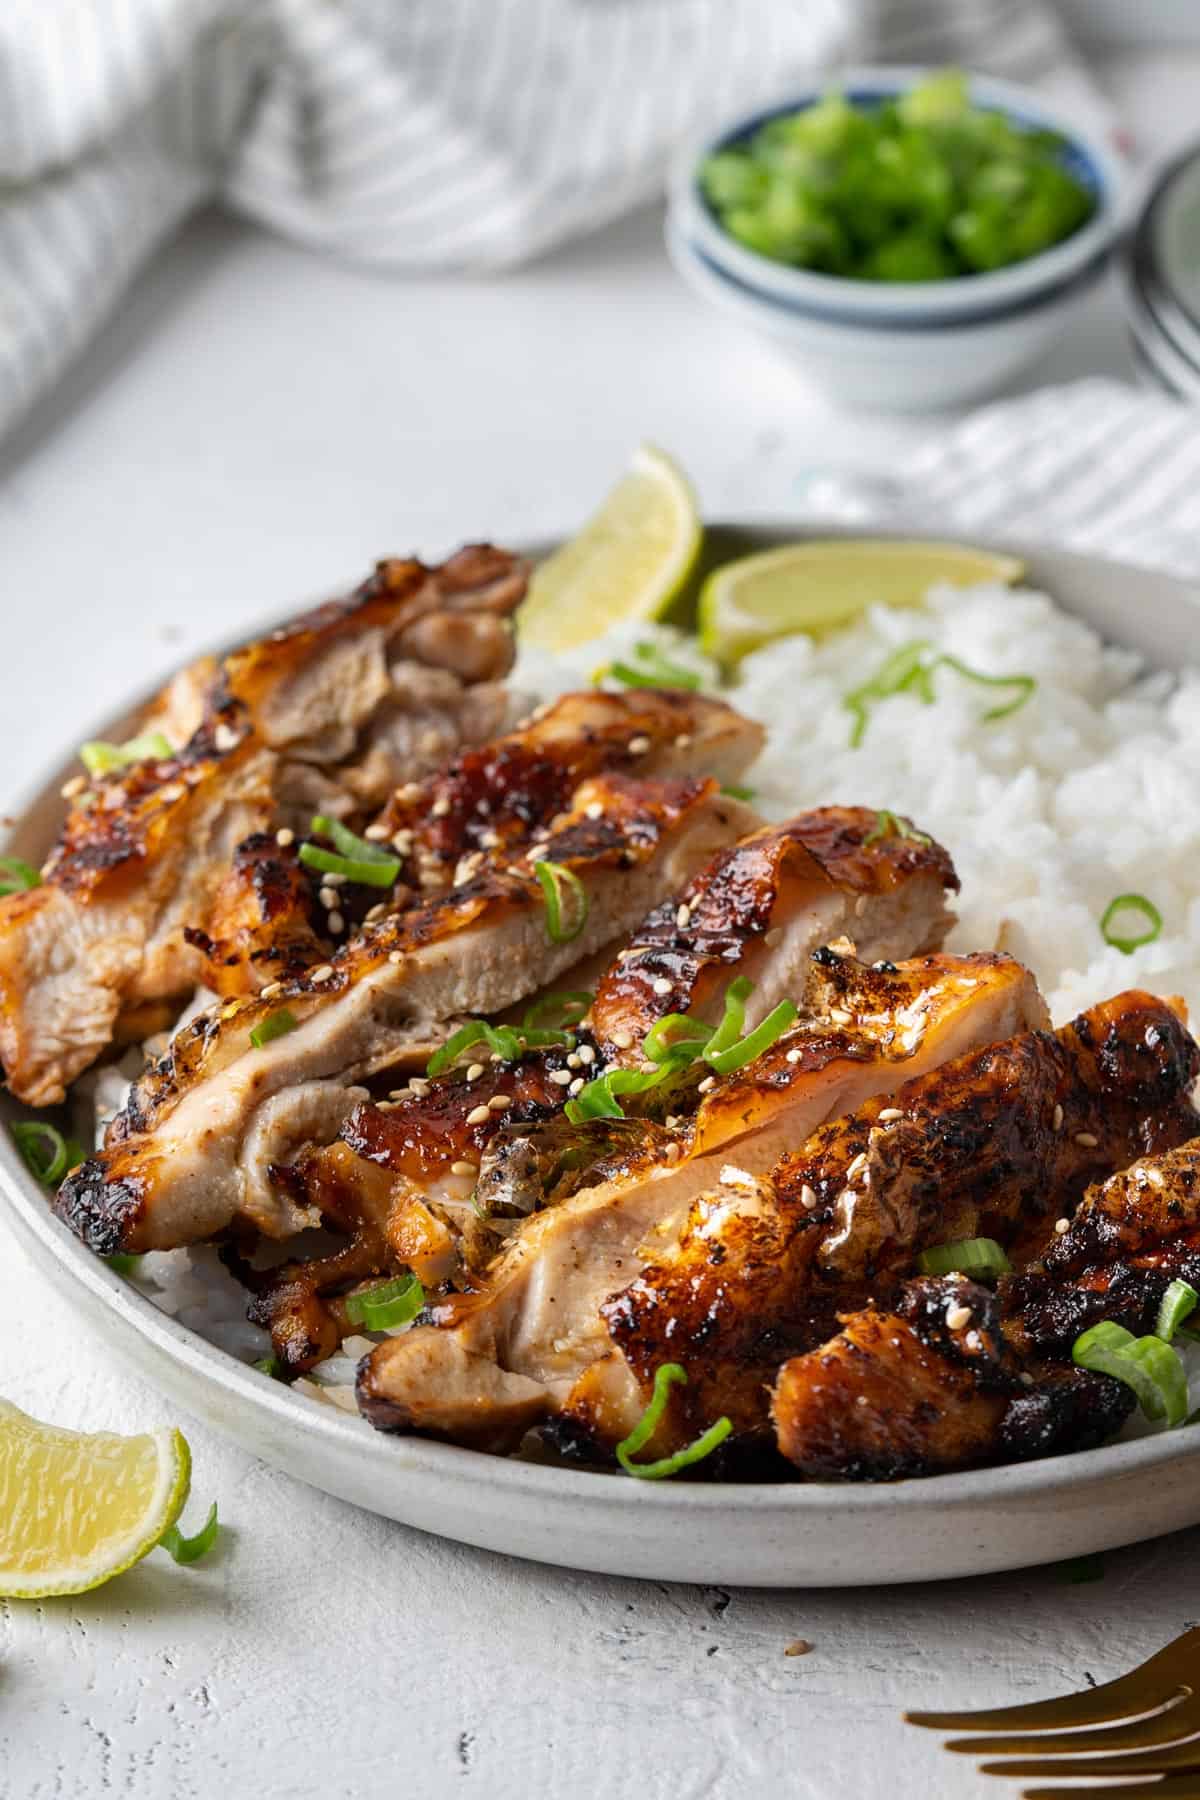 Sliced air-fryer soy sauce chicken with some rice in a plate view from front.